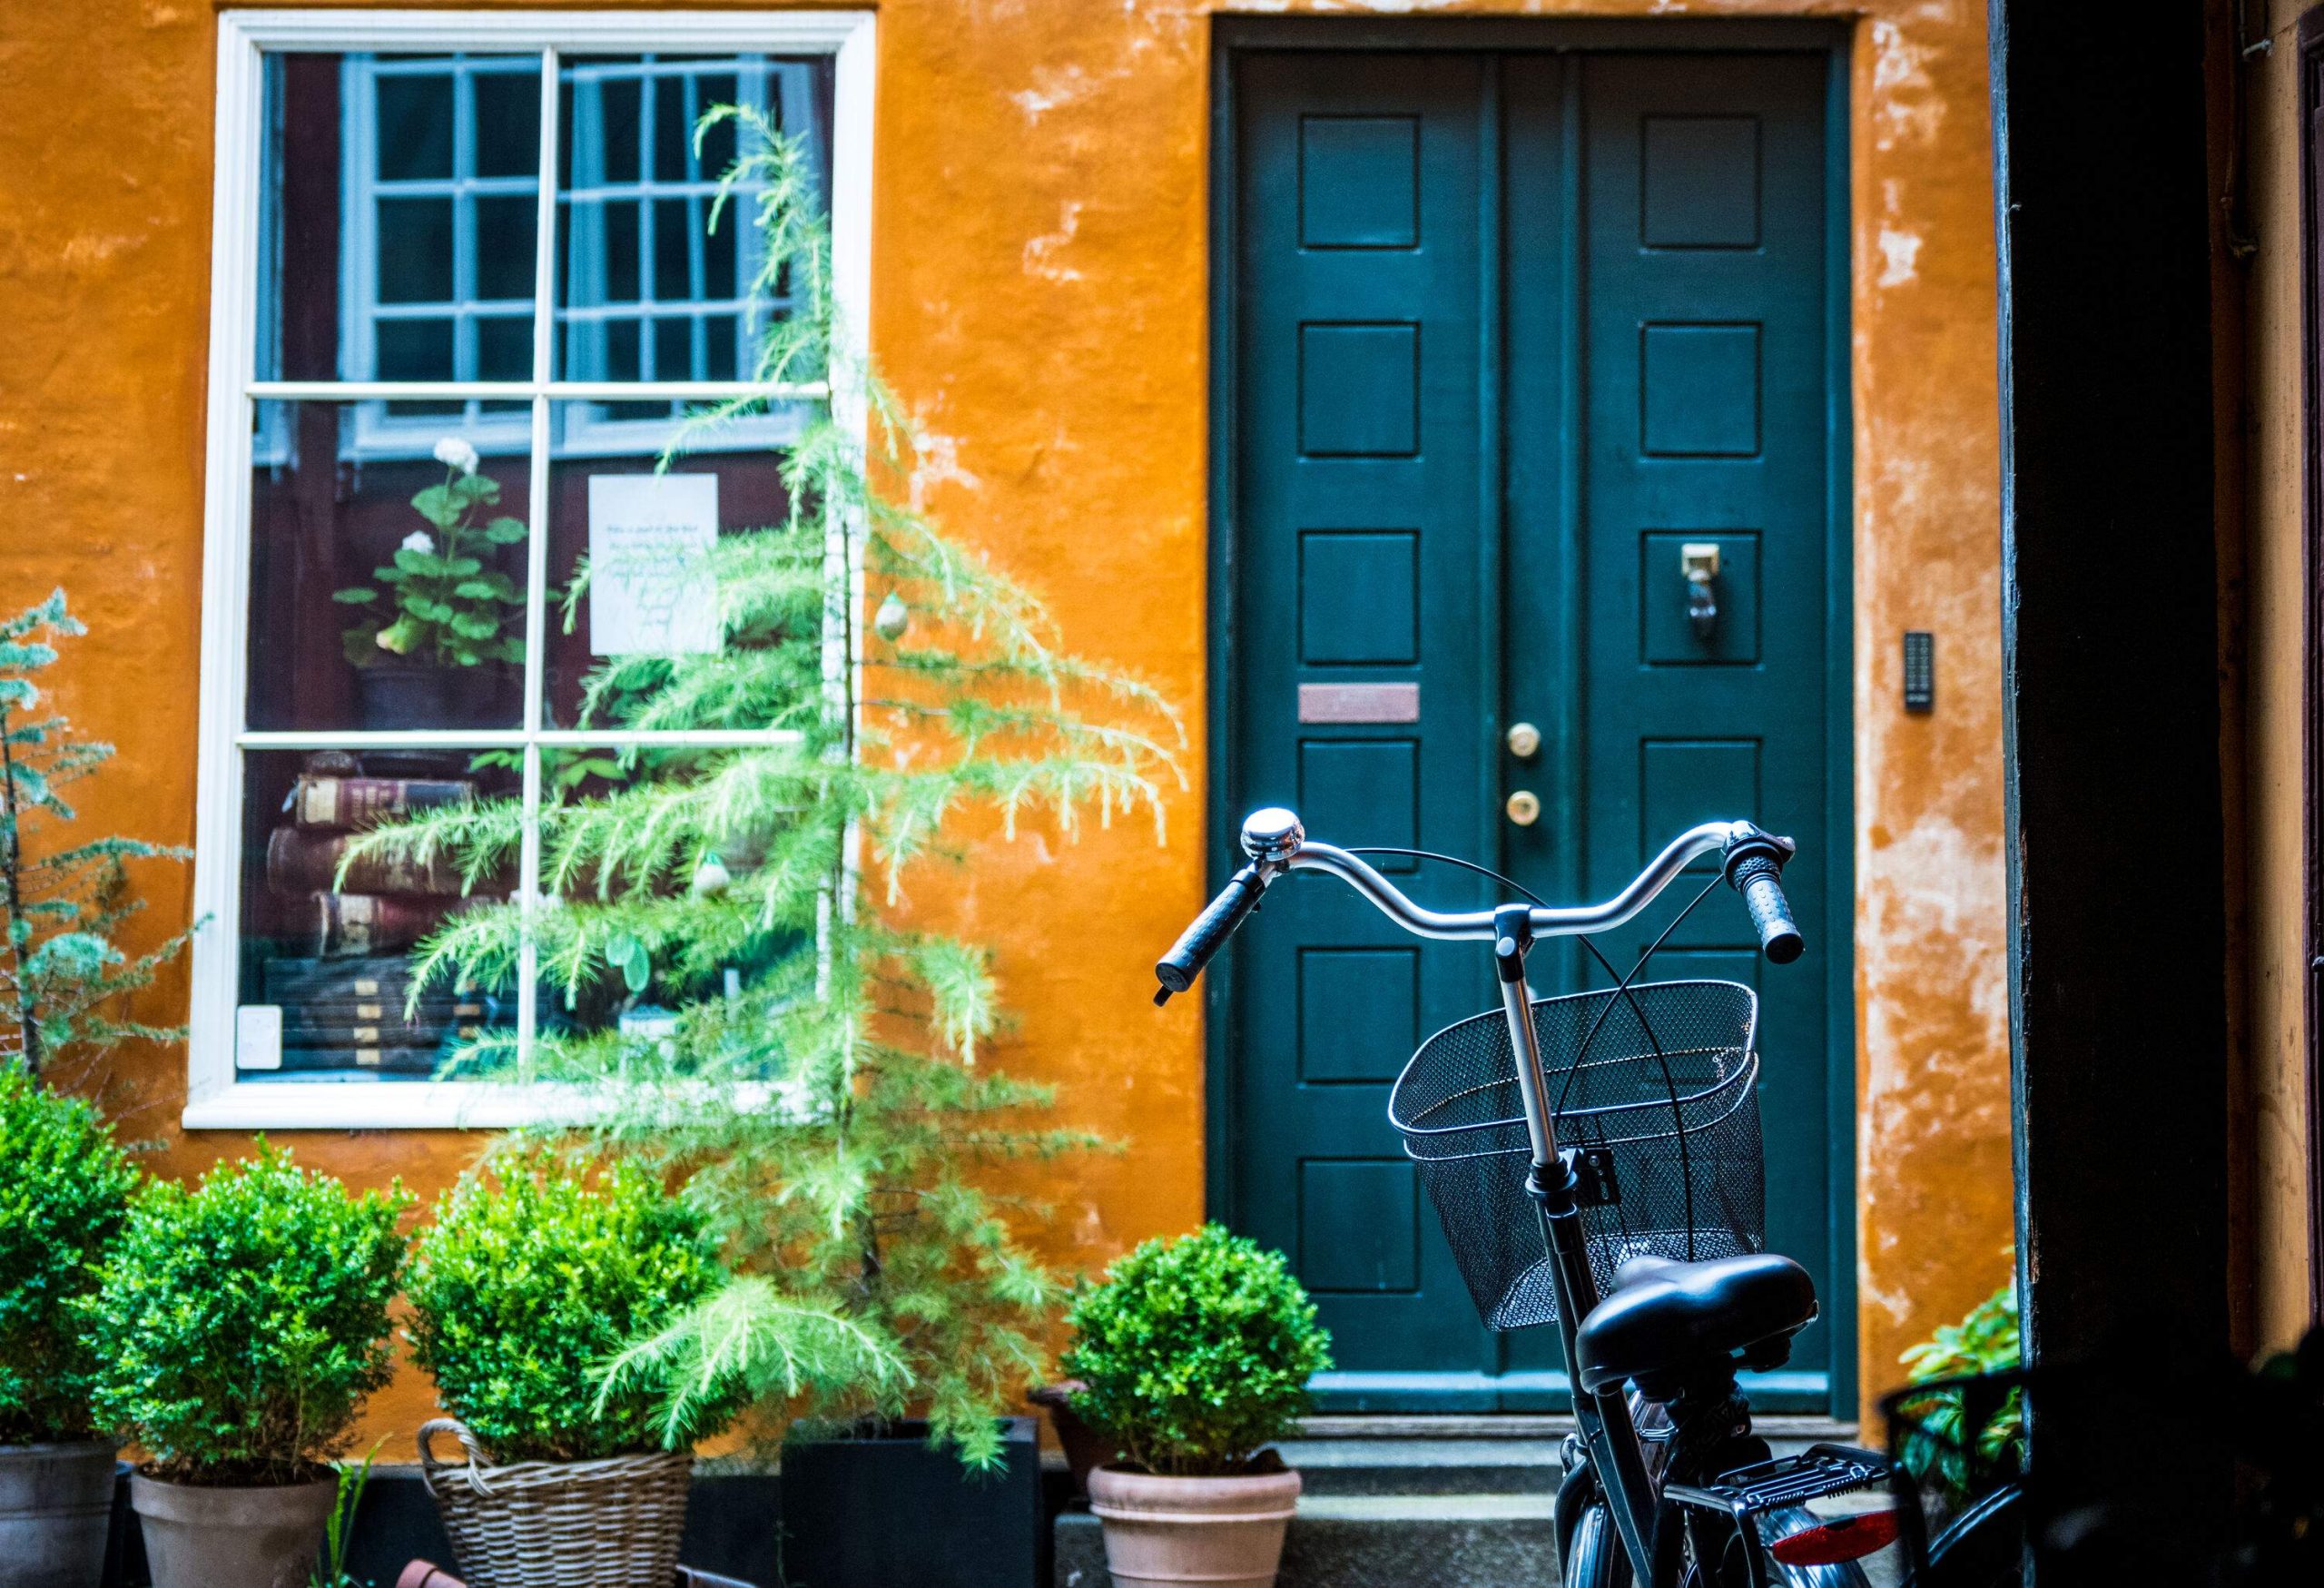 A bicycle parked in front of a blue door on an orange wall lined with plants.